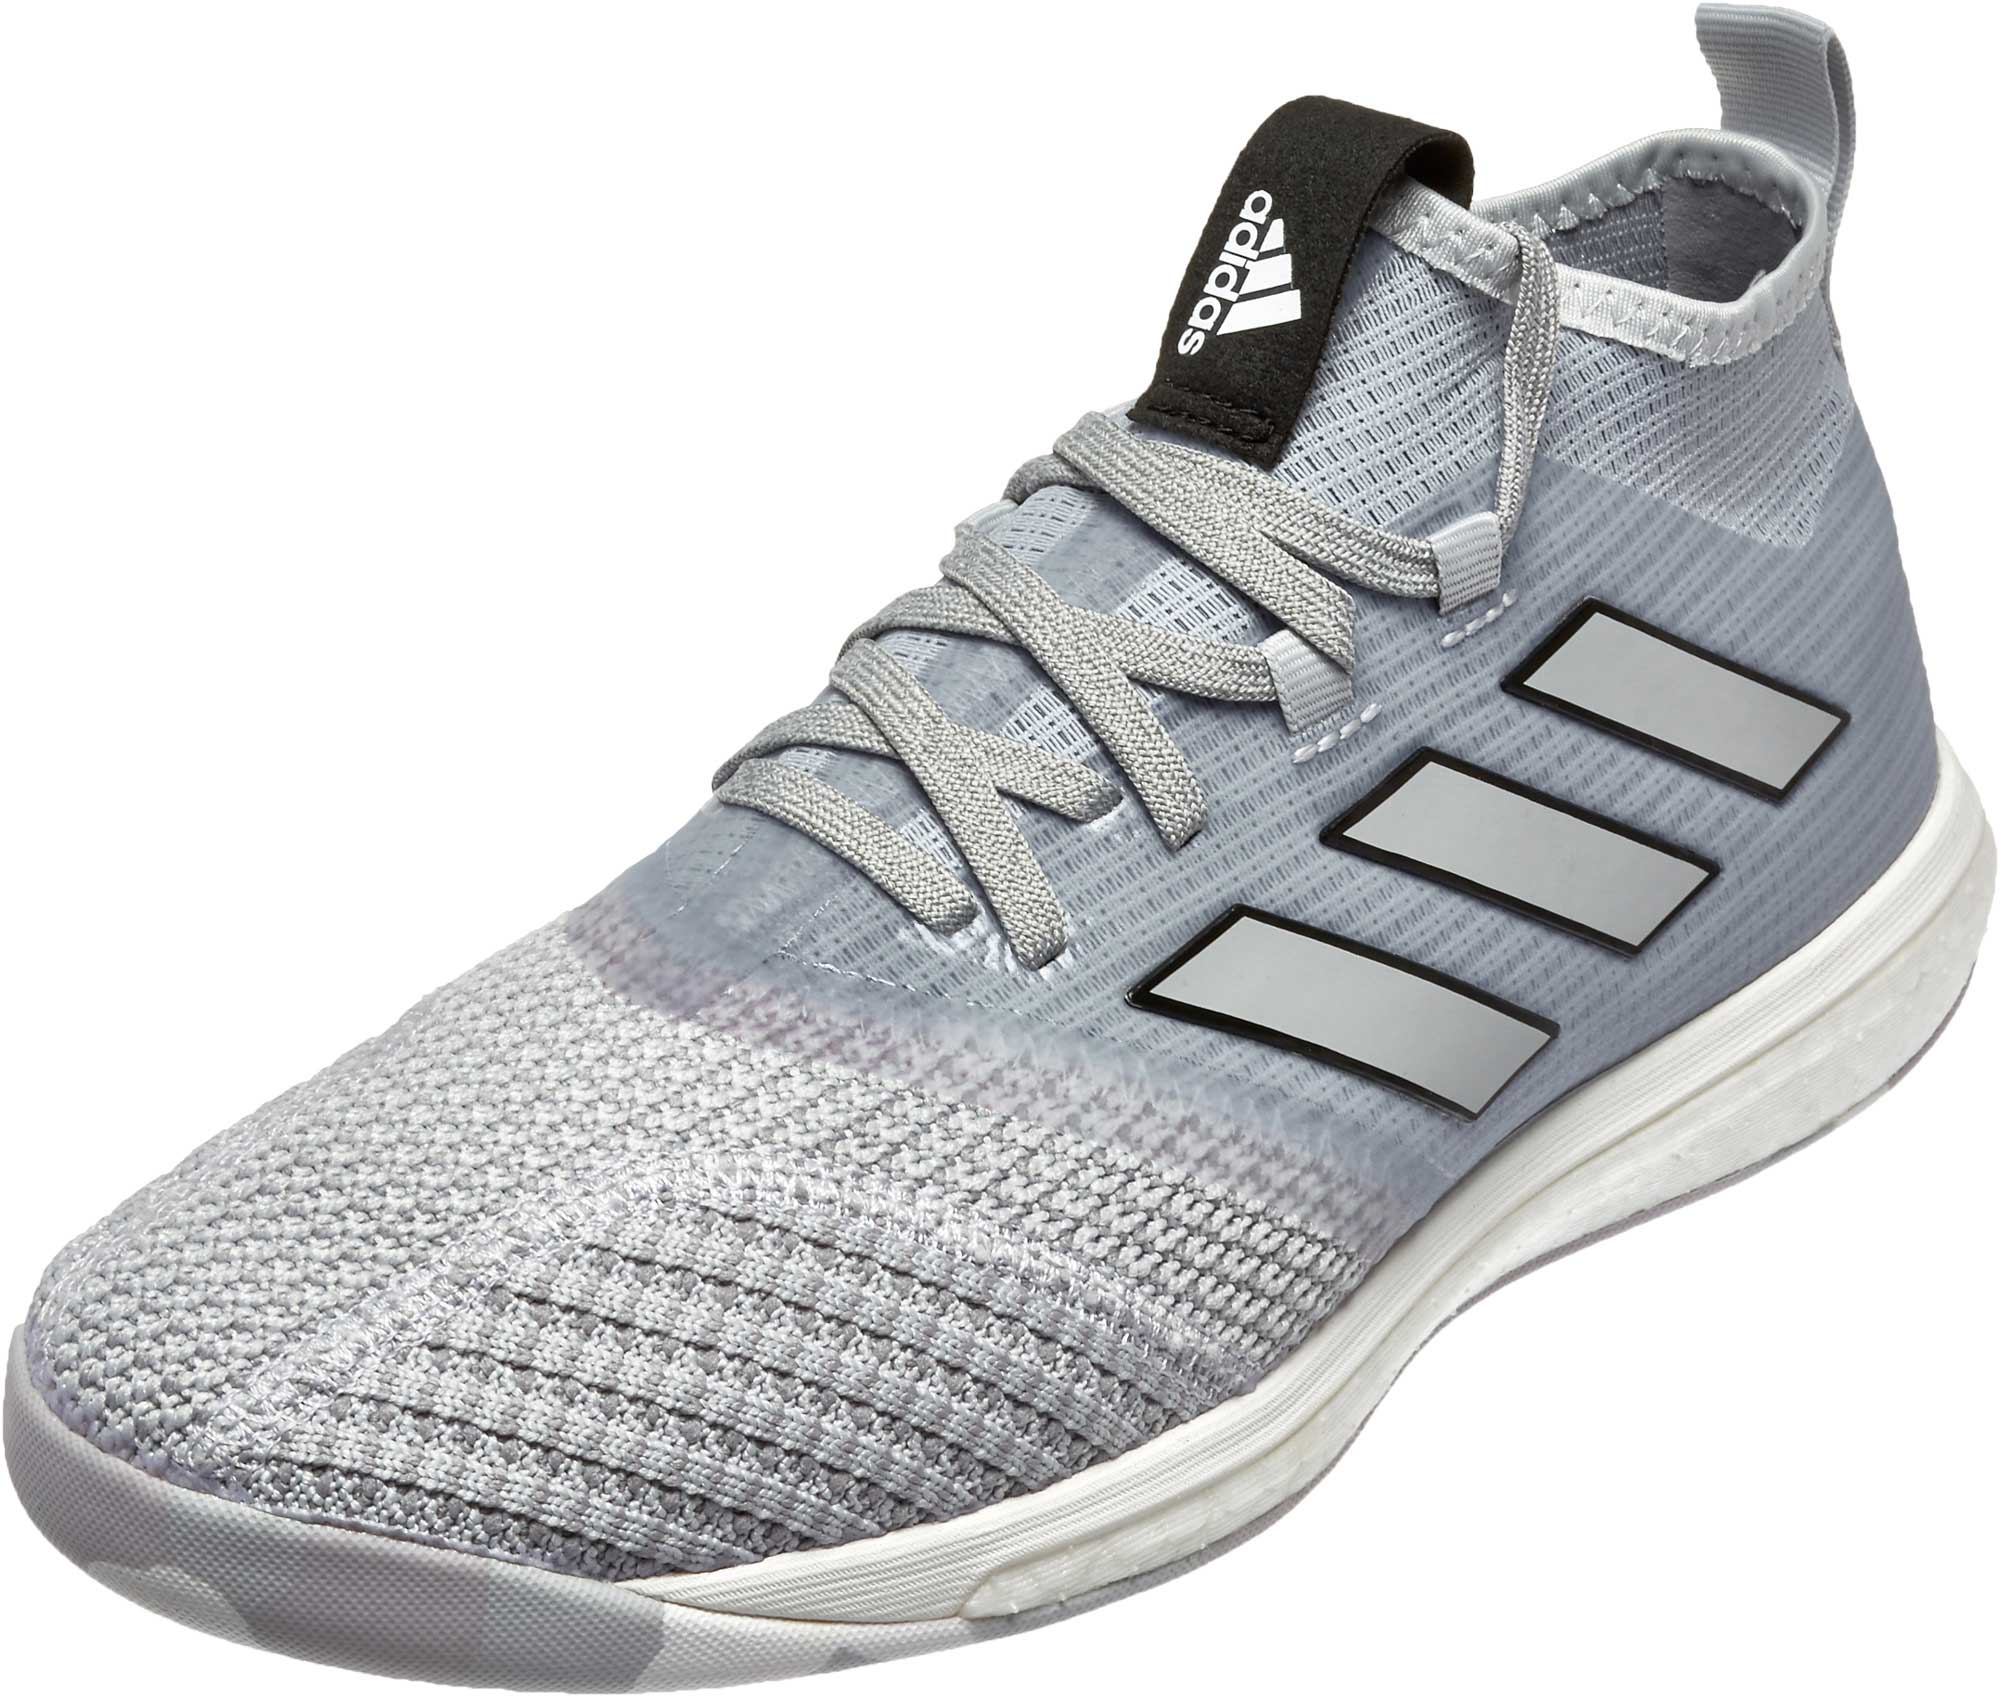 Tango 17.1 TR Soccer Shoes - Clear Grey & Mid Grey - Soccer